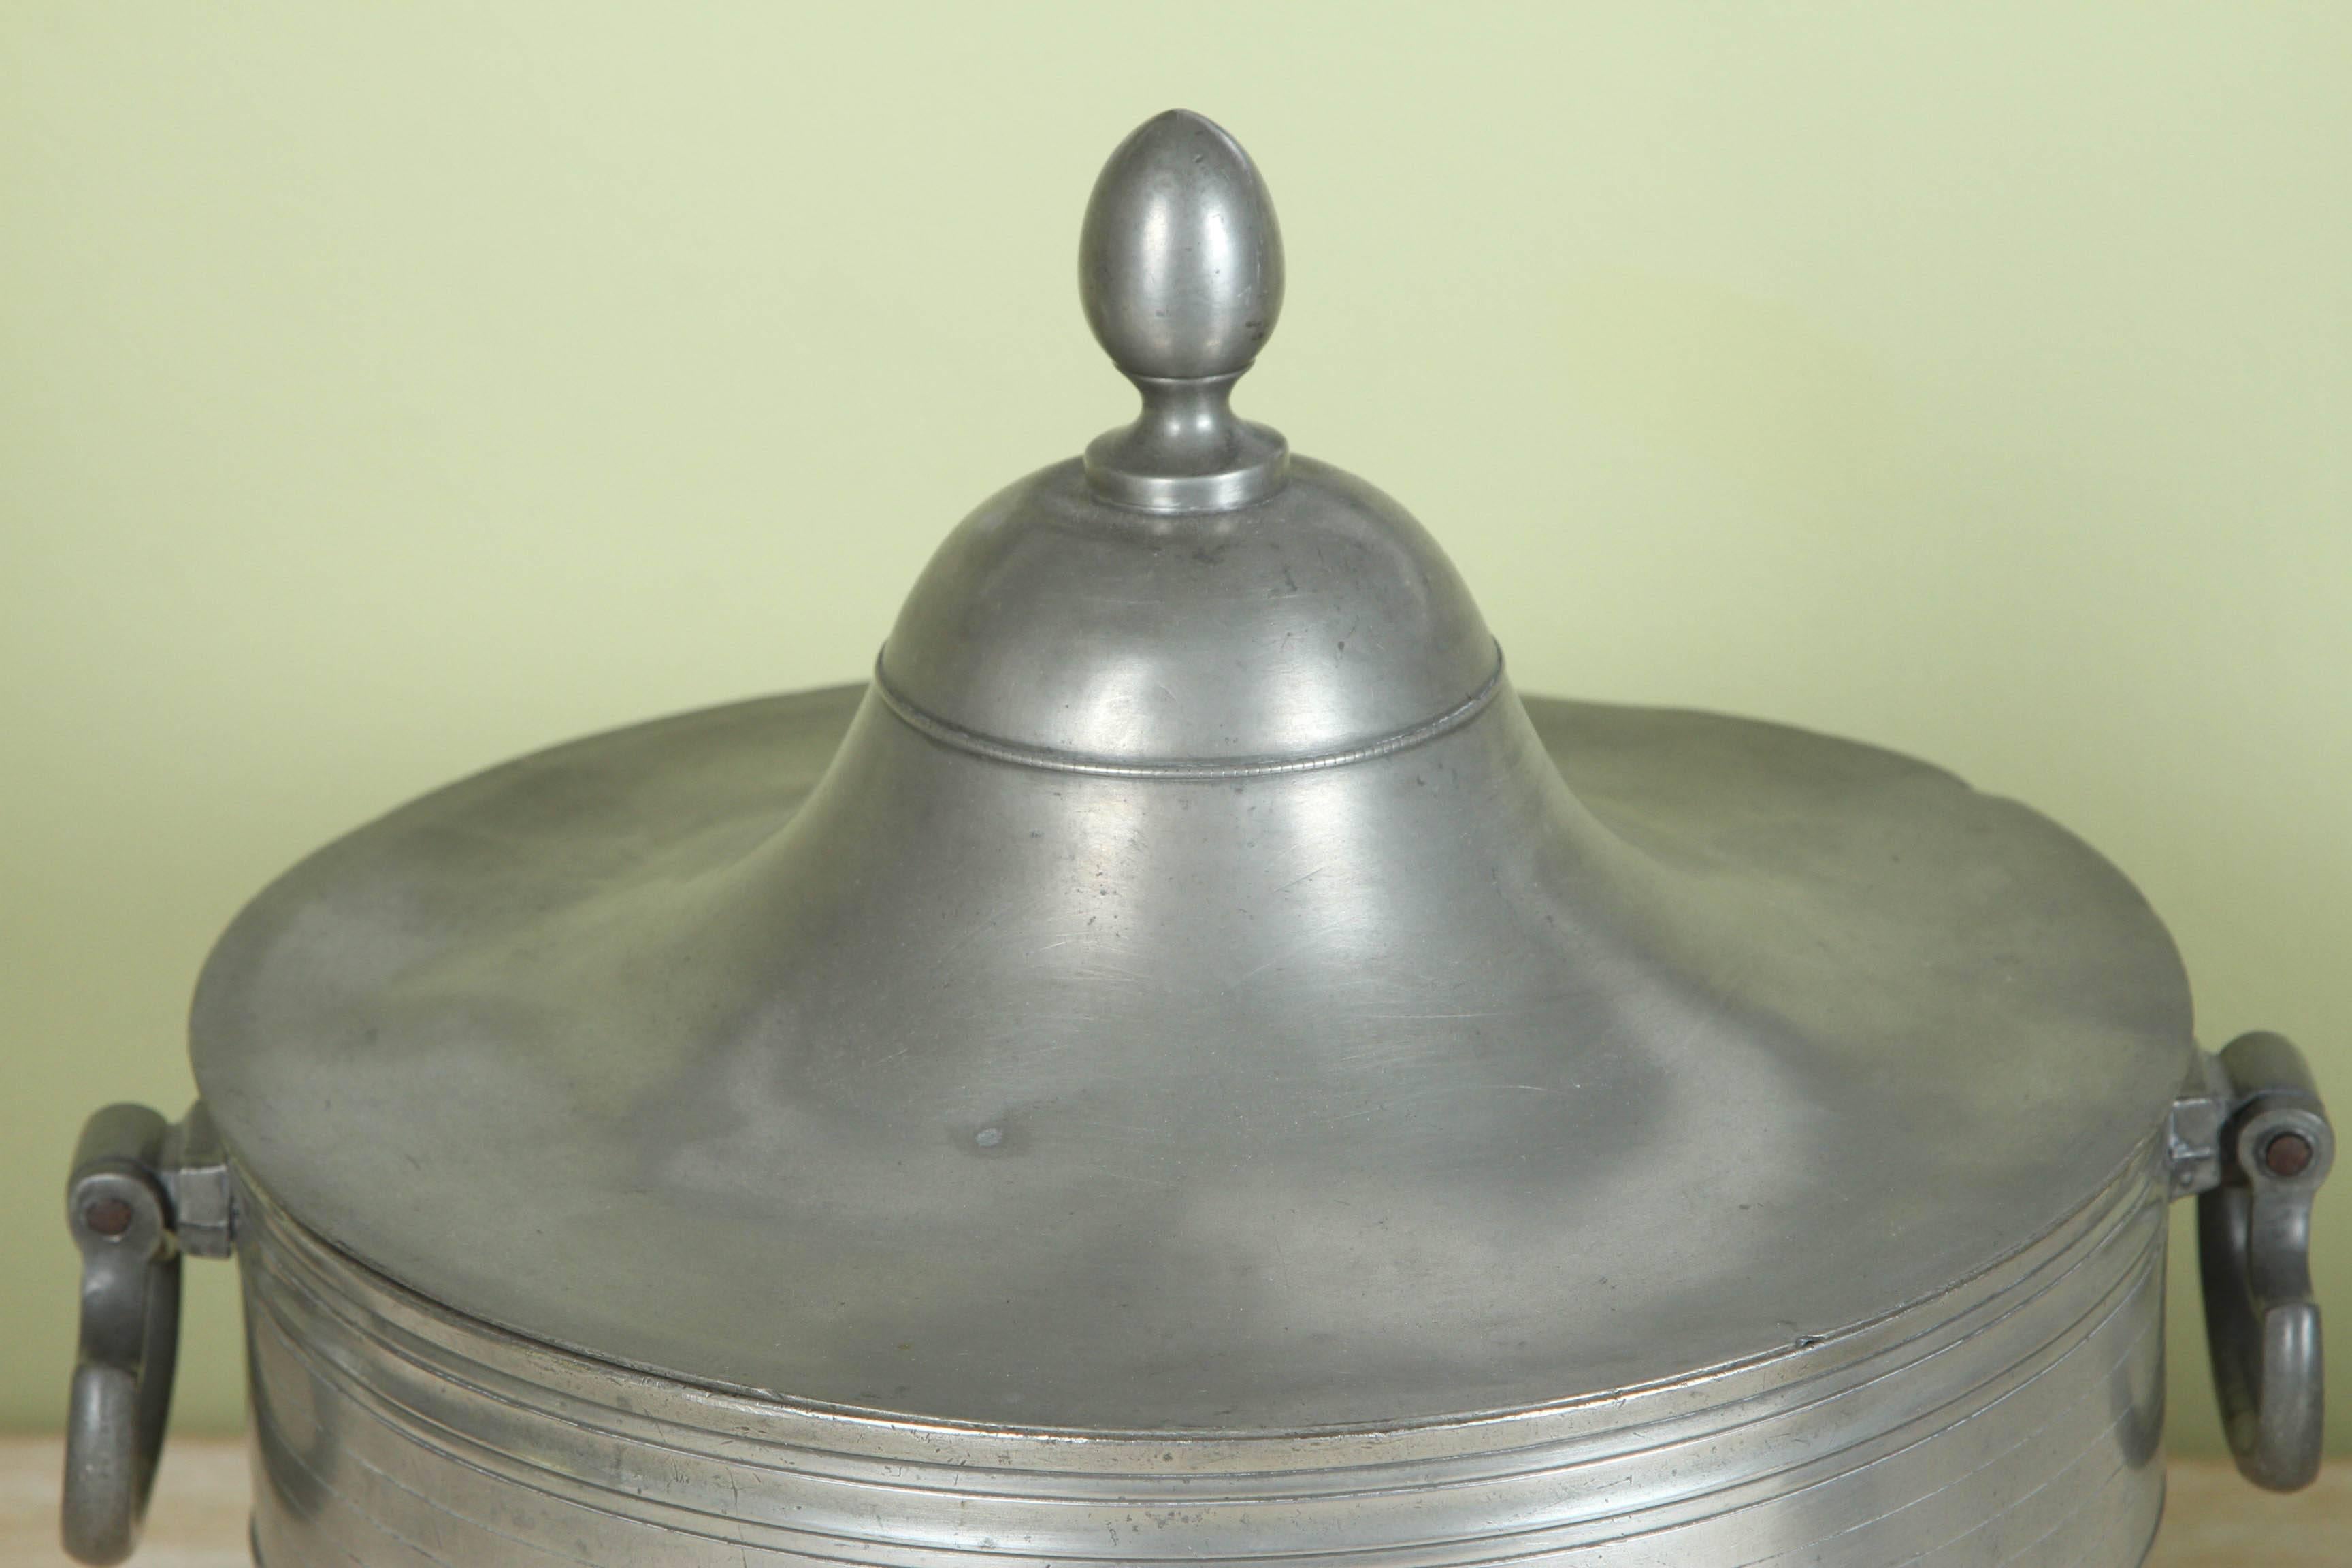 A Dutch early 19th century pewter tureen with cover from the Lauren Bacall Estate.